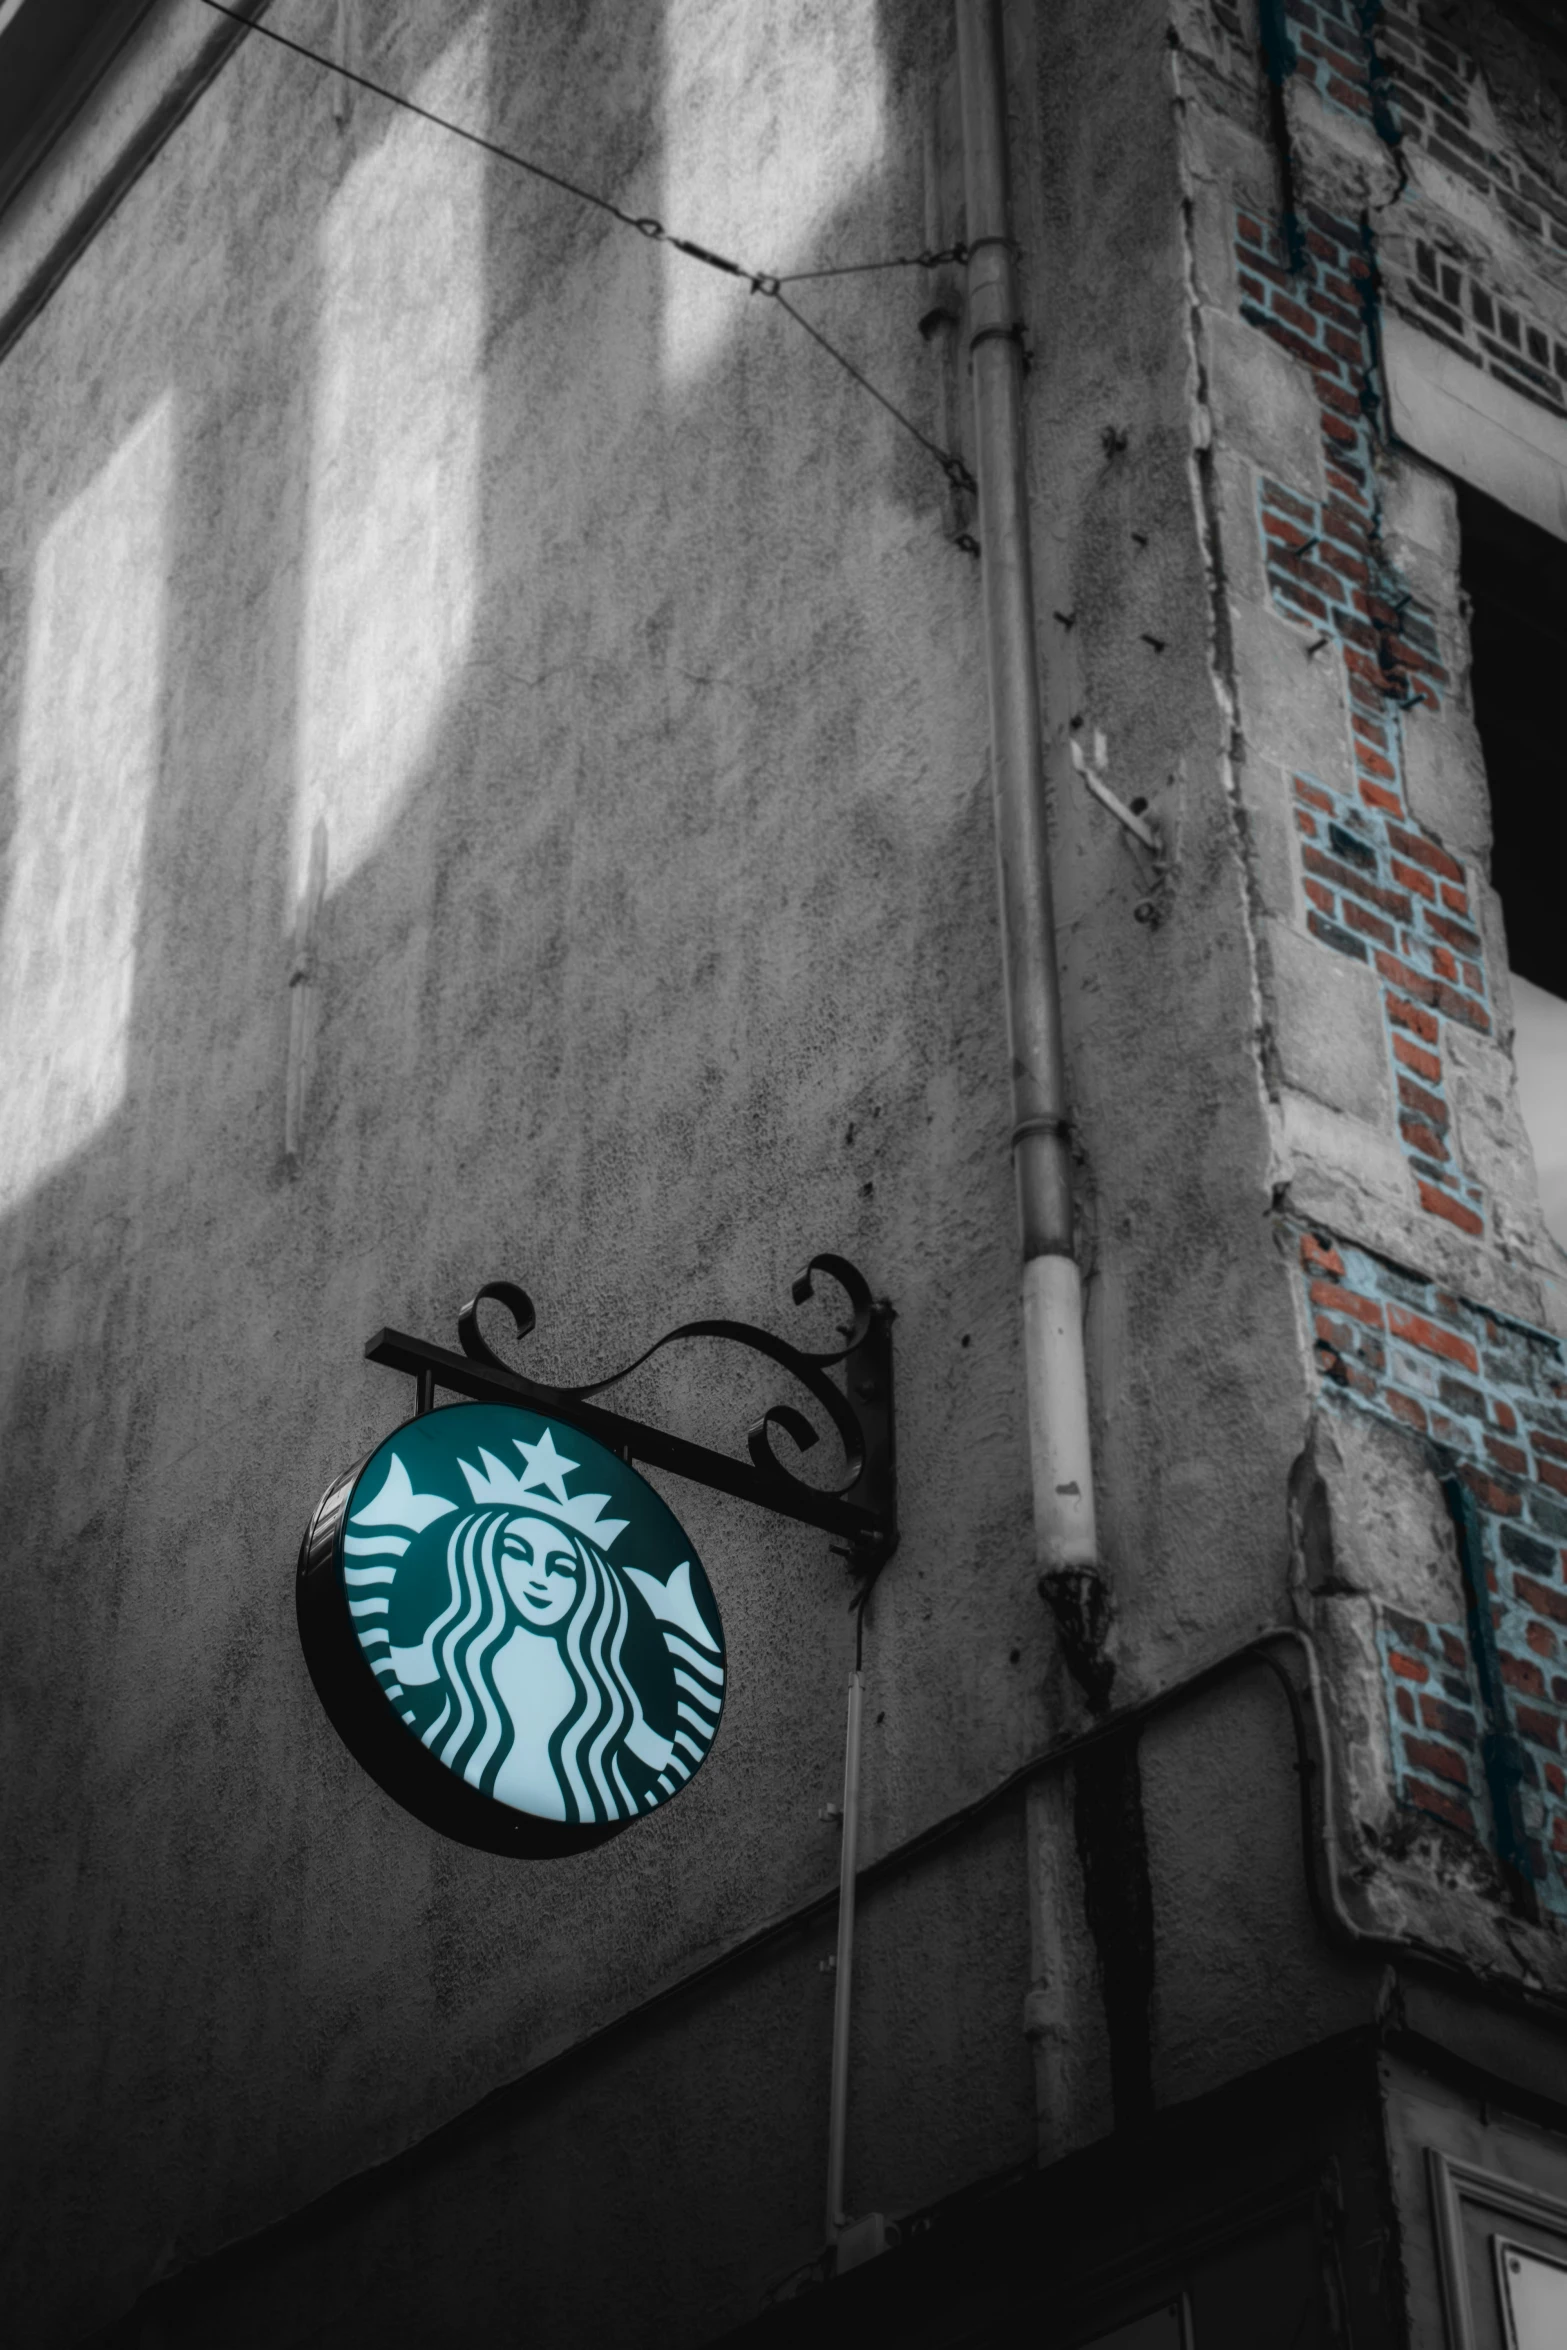 a black and white po of the starbucks logo on a building